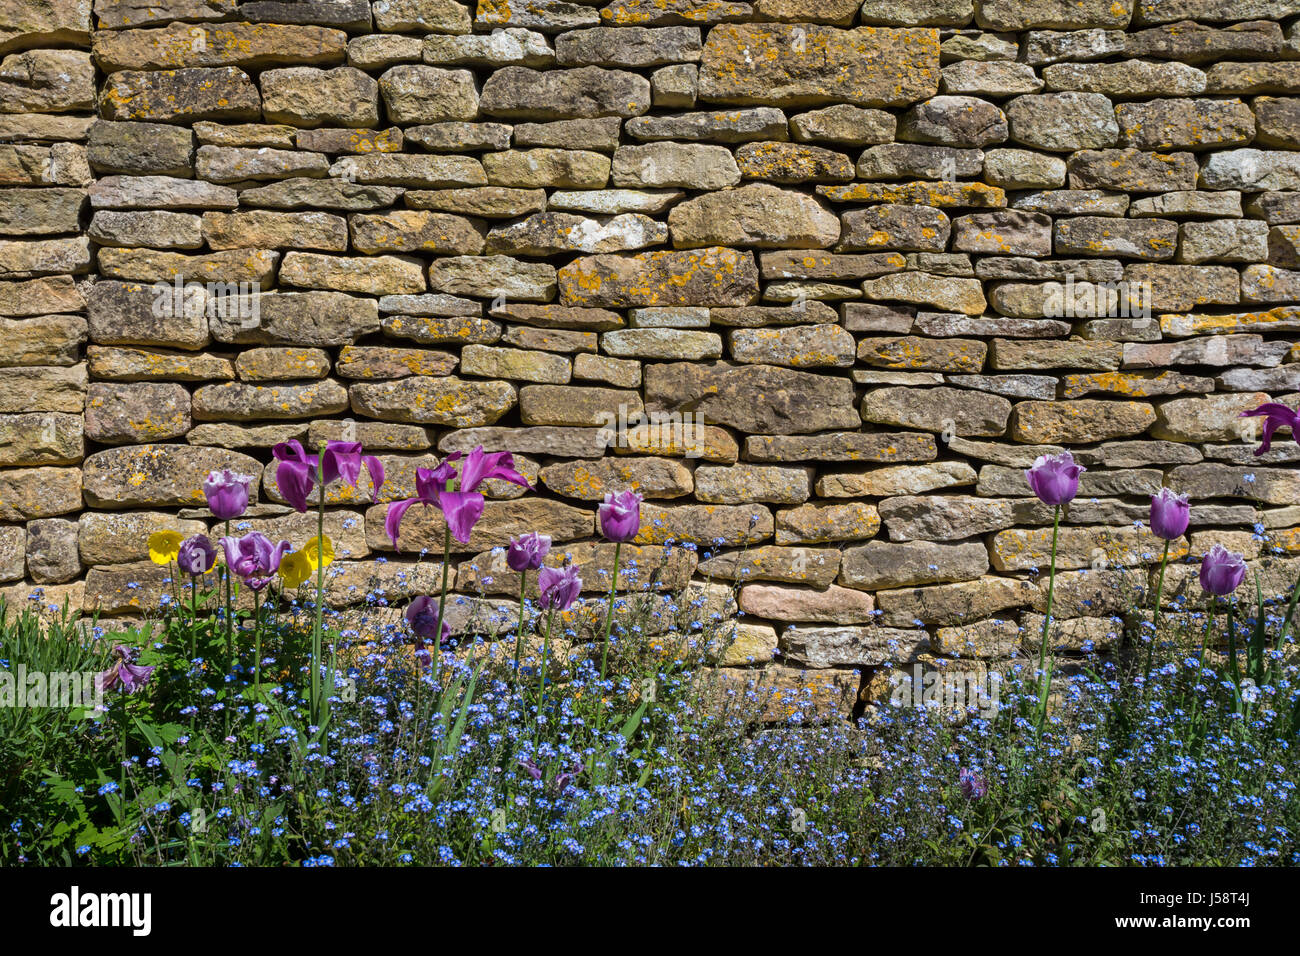 Dry stone wall, cotswolds stone, Britain Stock Photo